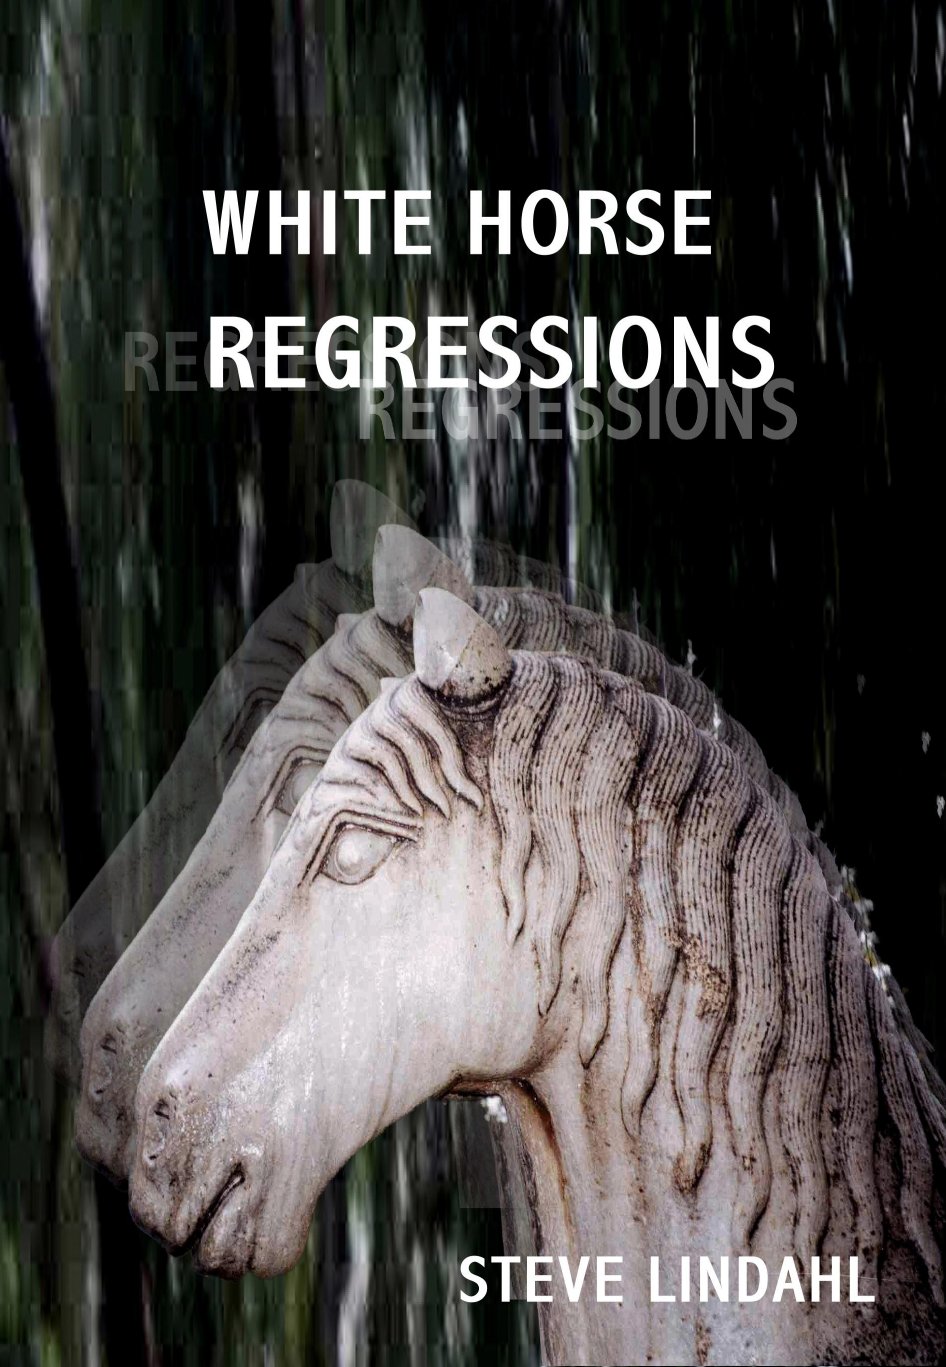 White Horse Regressions by Steve Lindahl